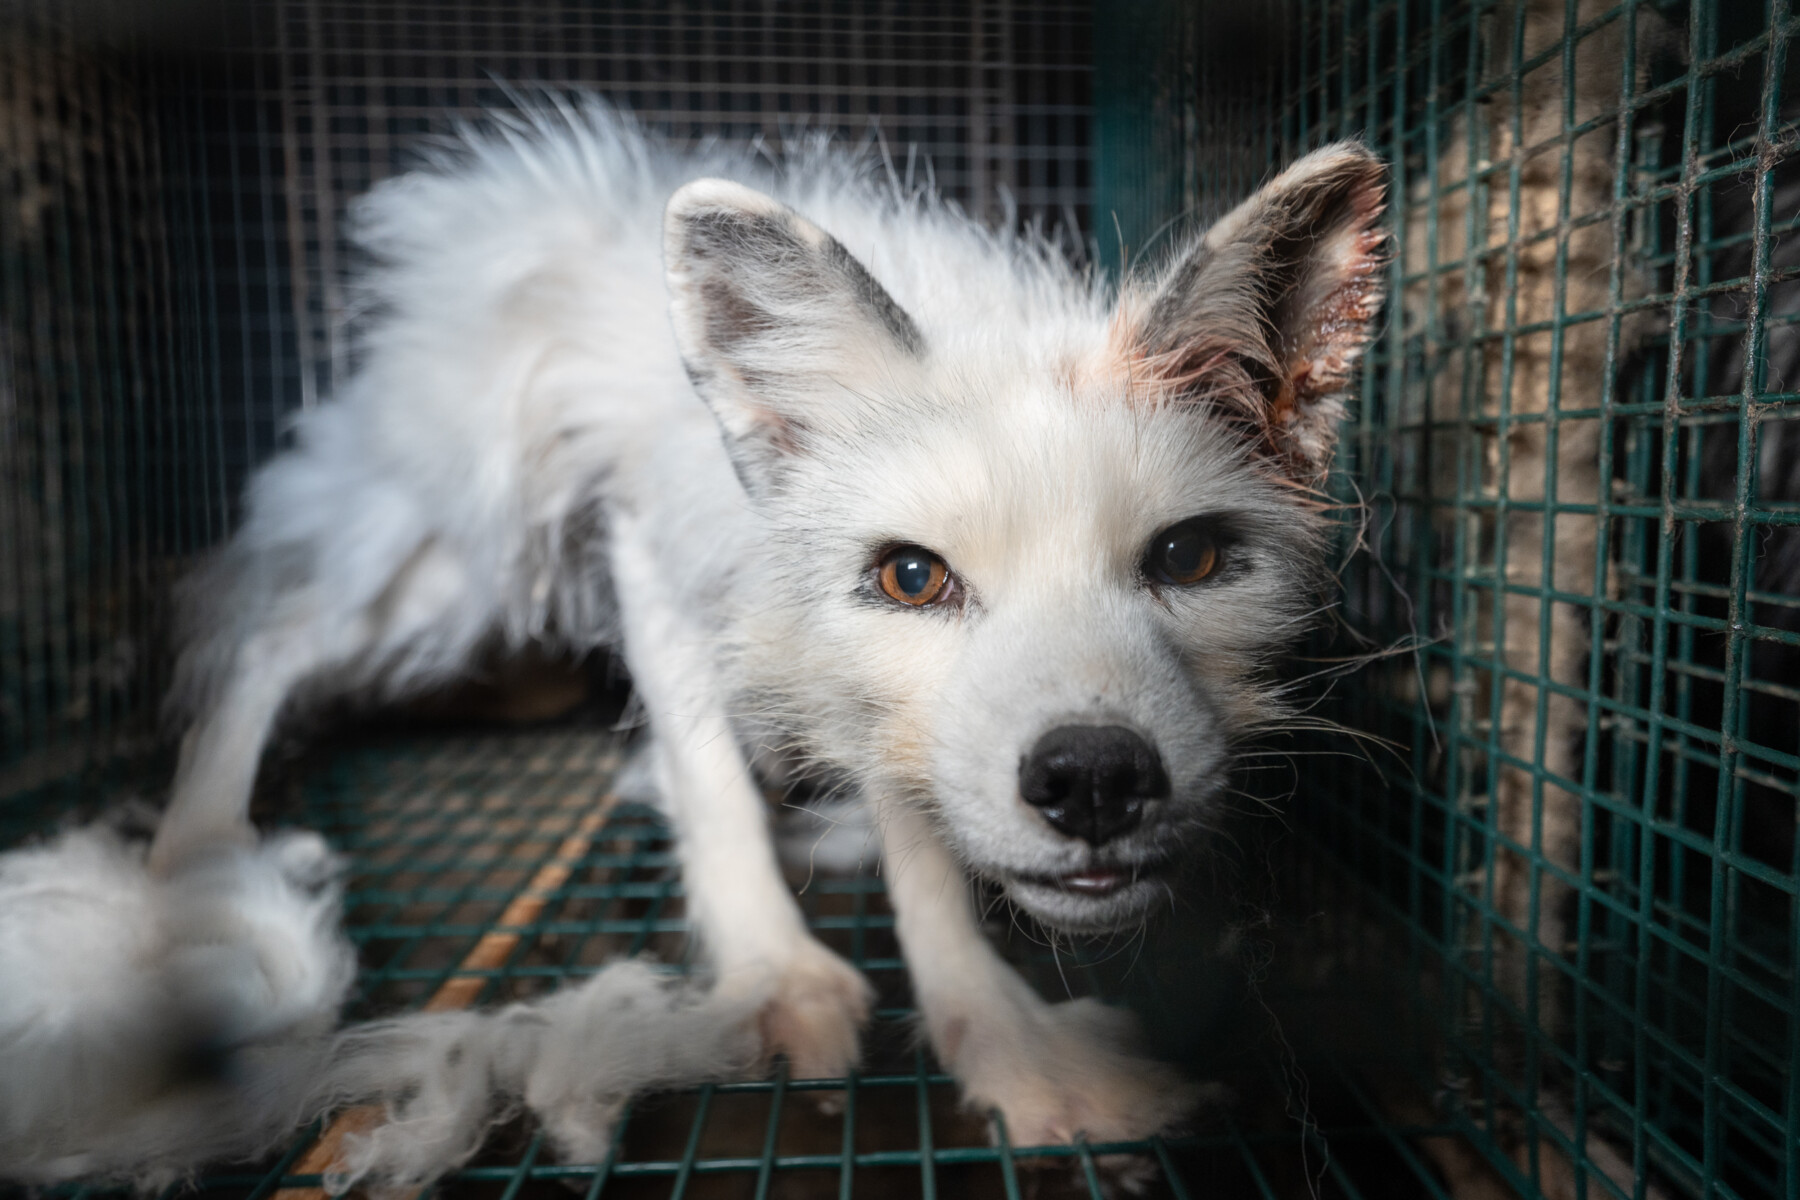 Millions of Animals Across the U.S. Suffer Agonizing Deaths in Cruel Traps  Just to Supply the Fashion Industry With Fur